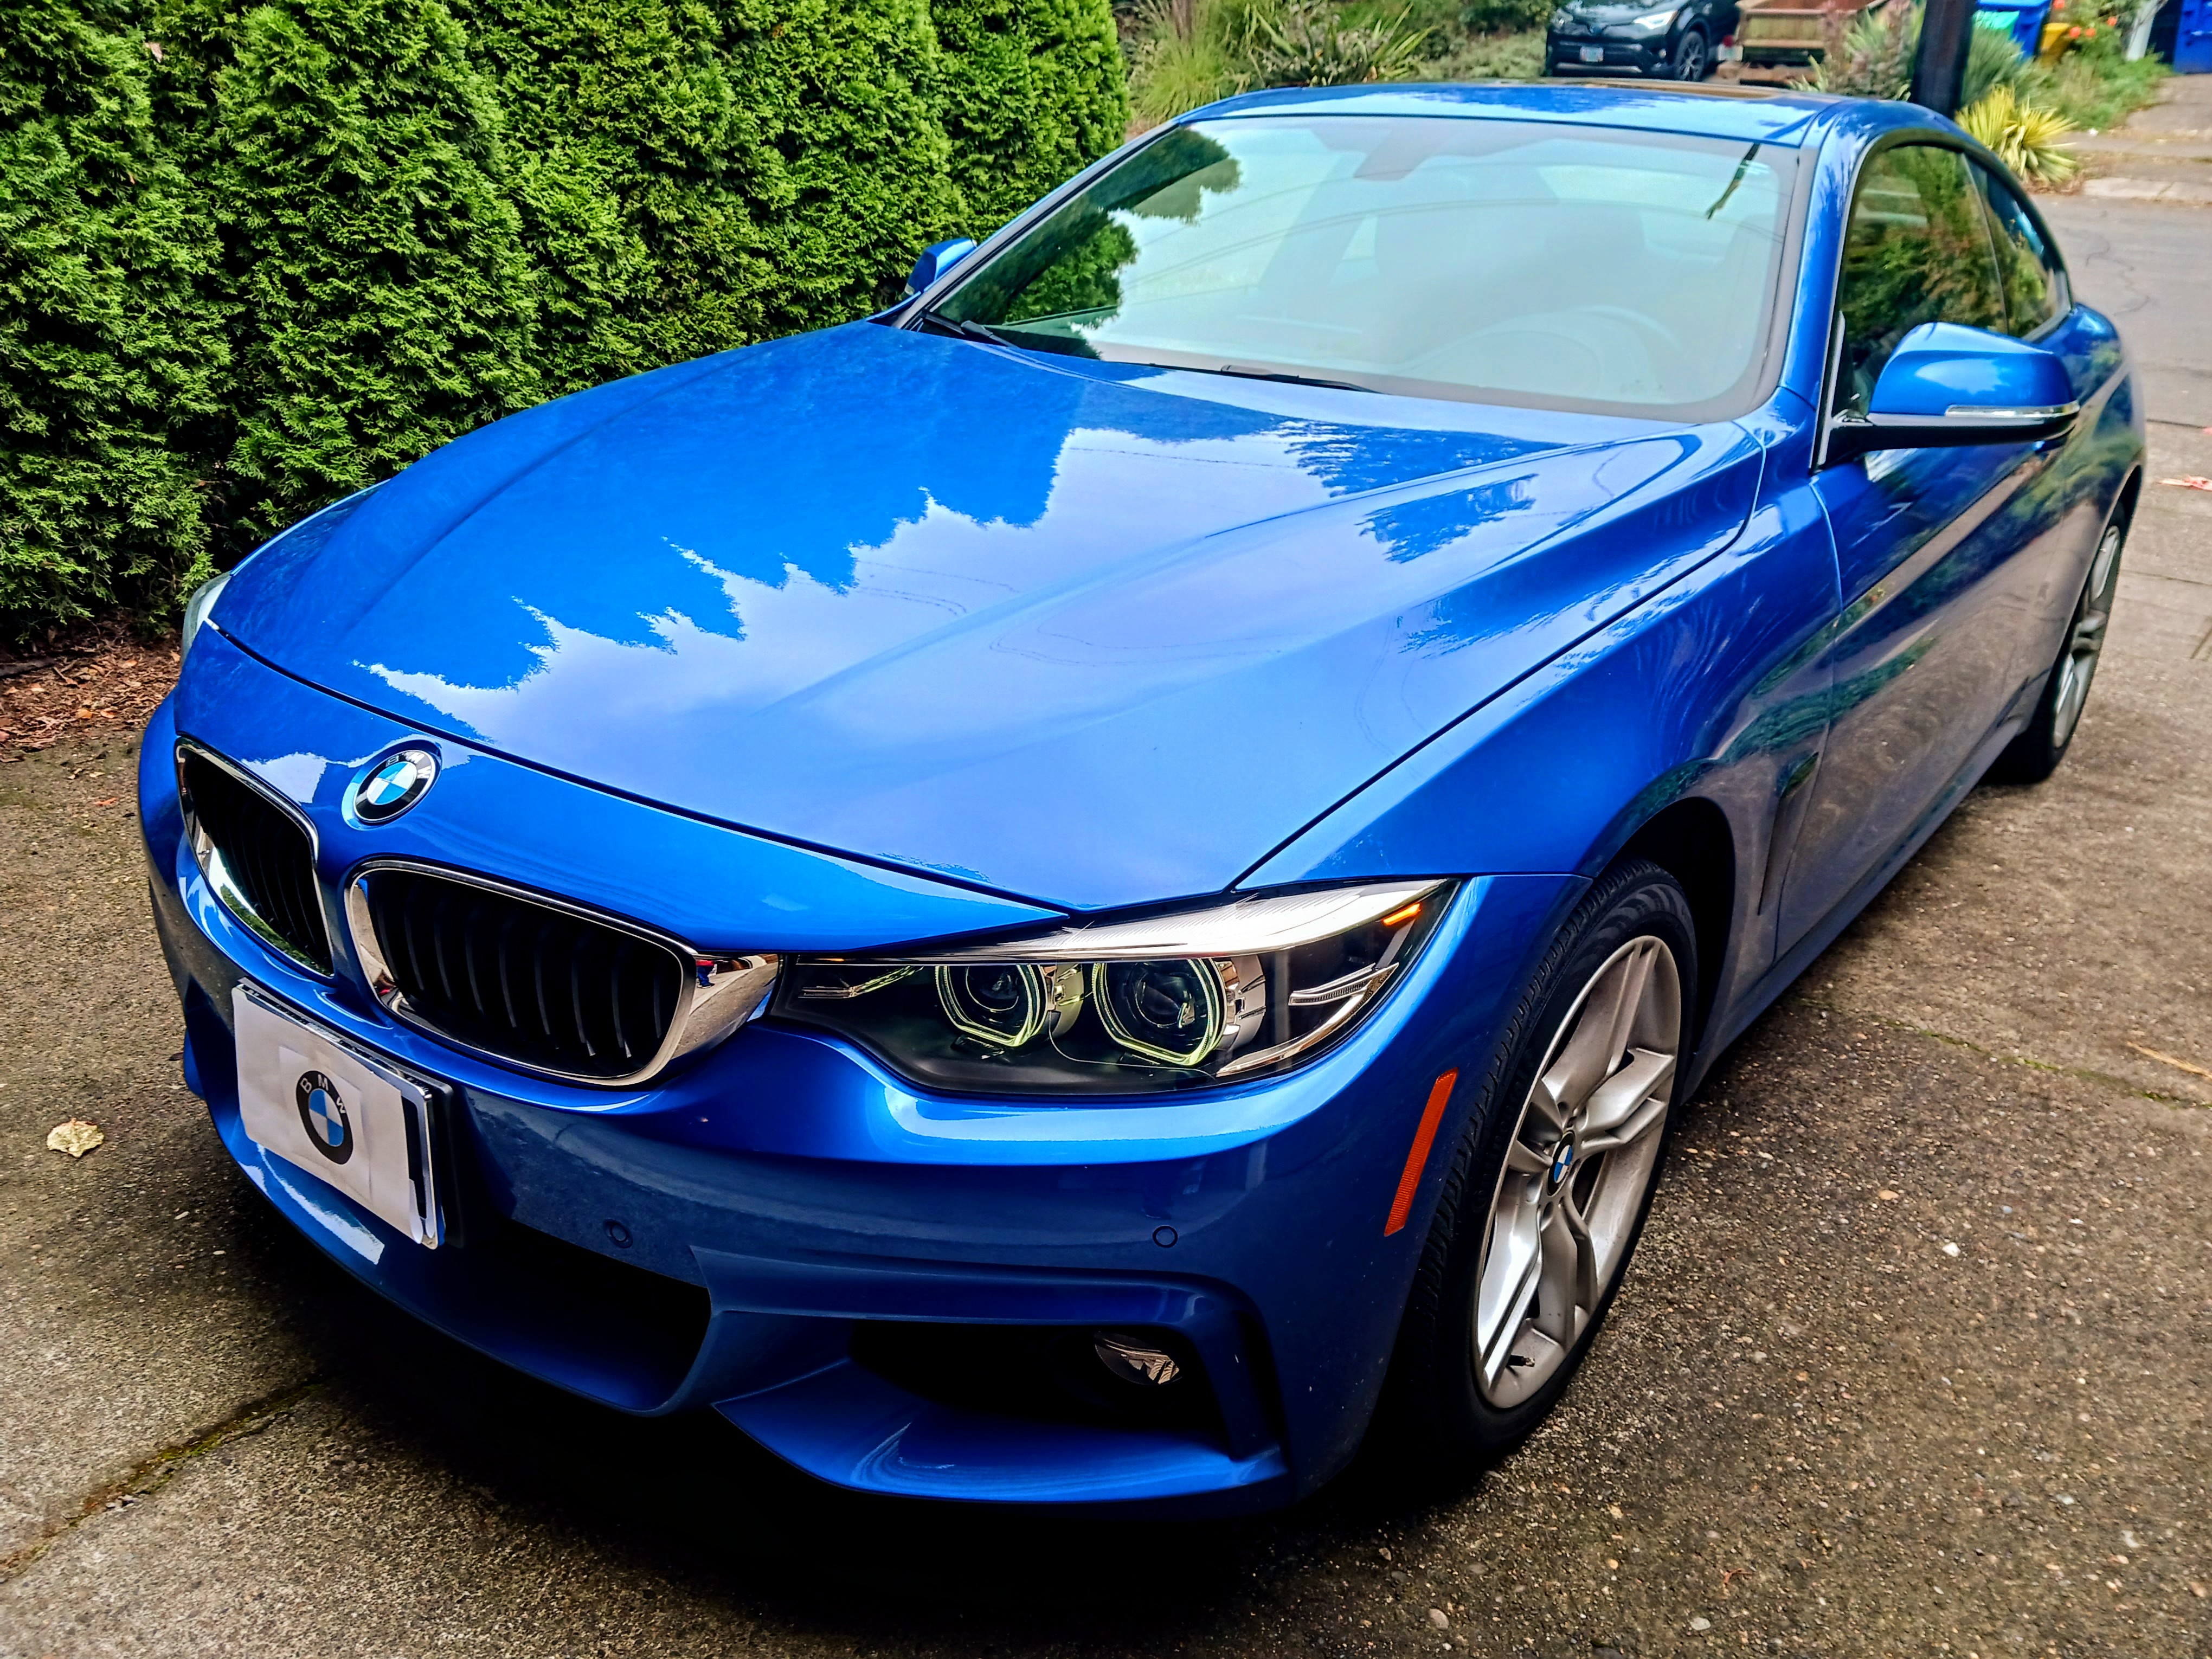 BMW Cars for Sale in Greater Vancouver, BMW Dealership